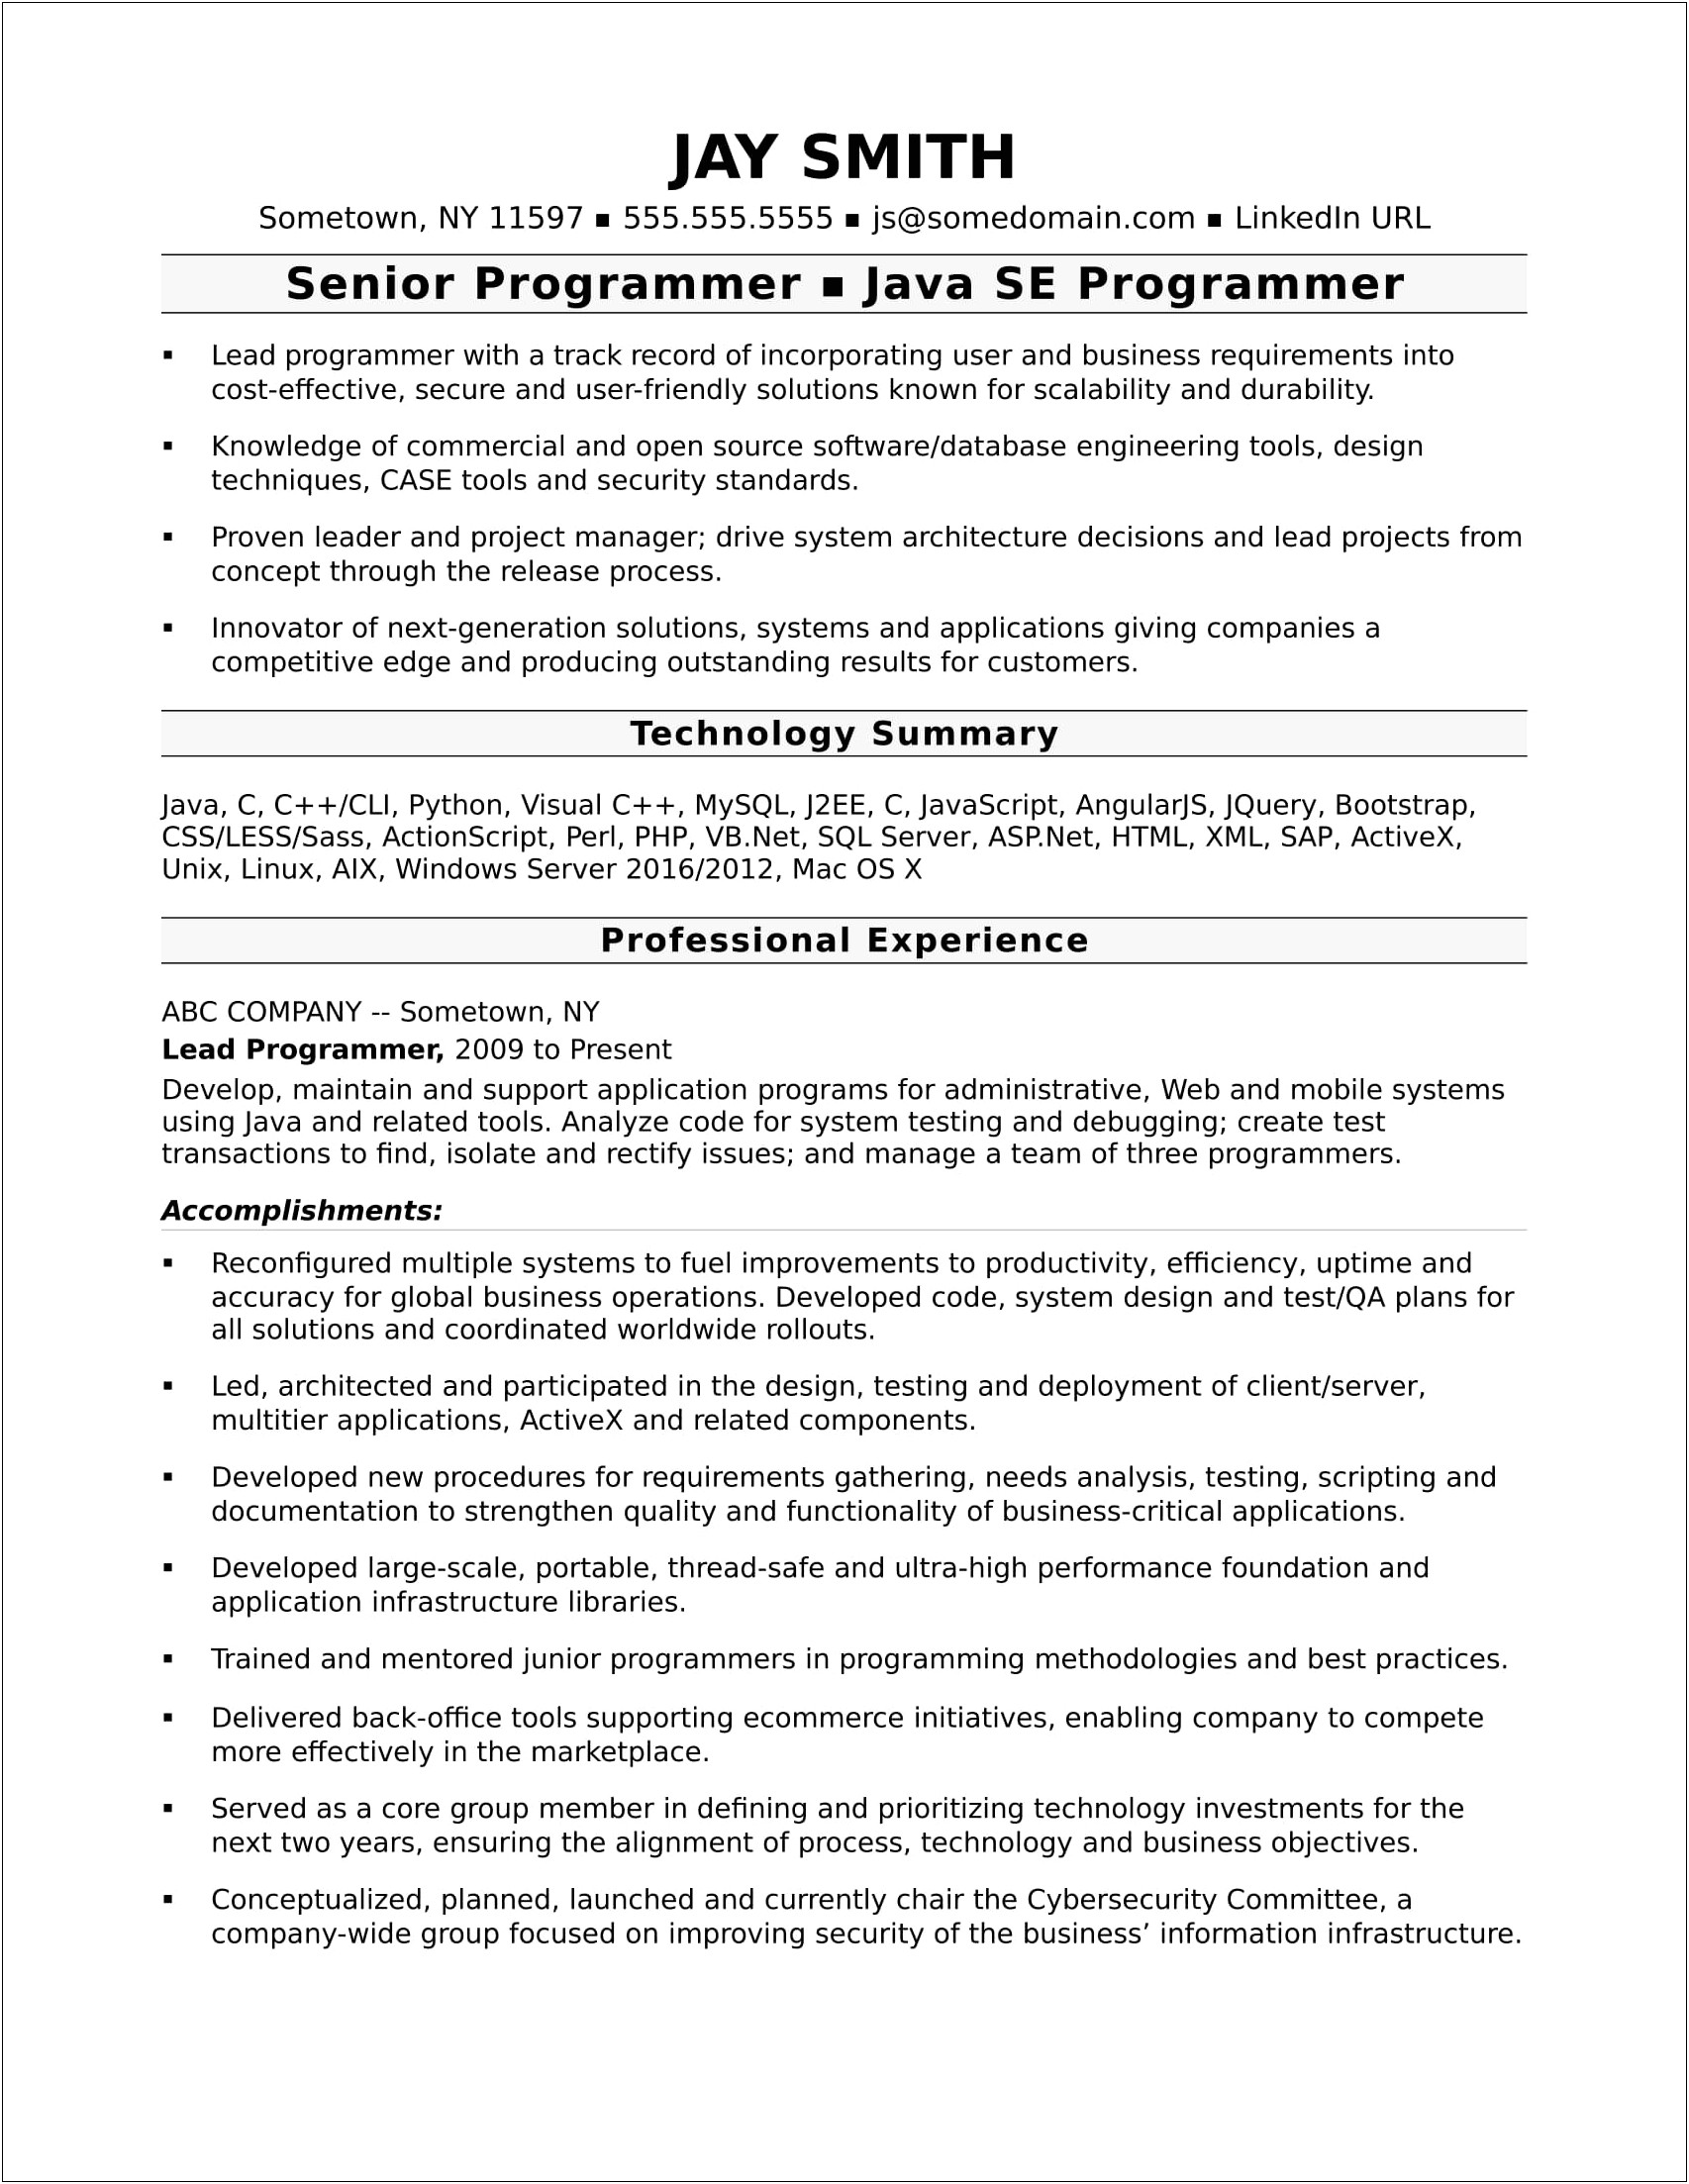 Computer Related Jobs To Have On A Resume